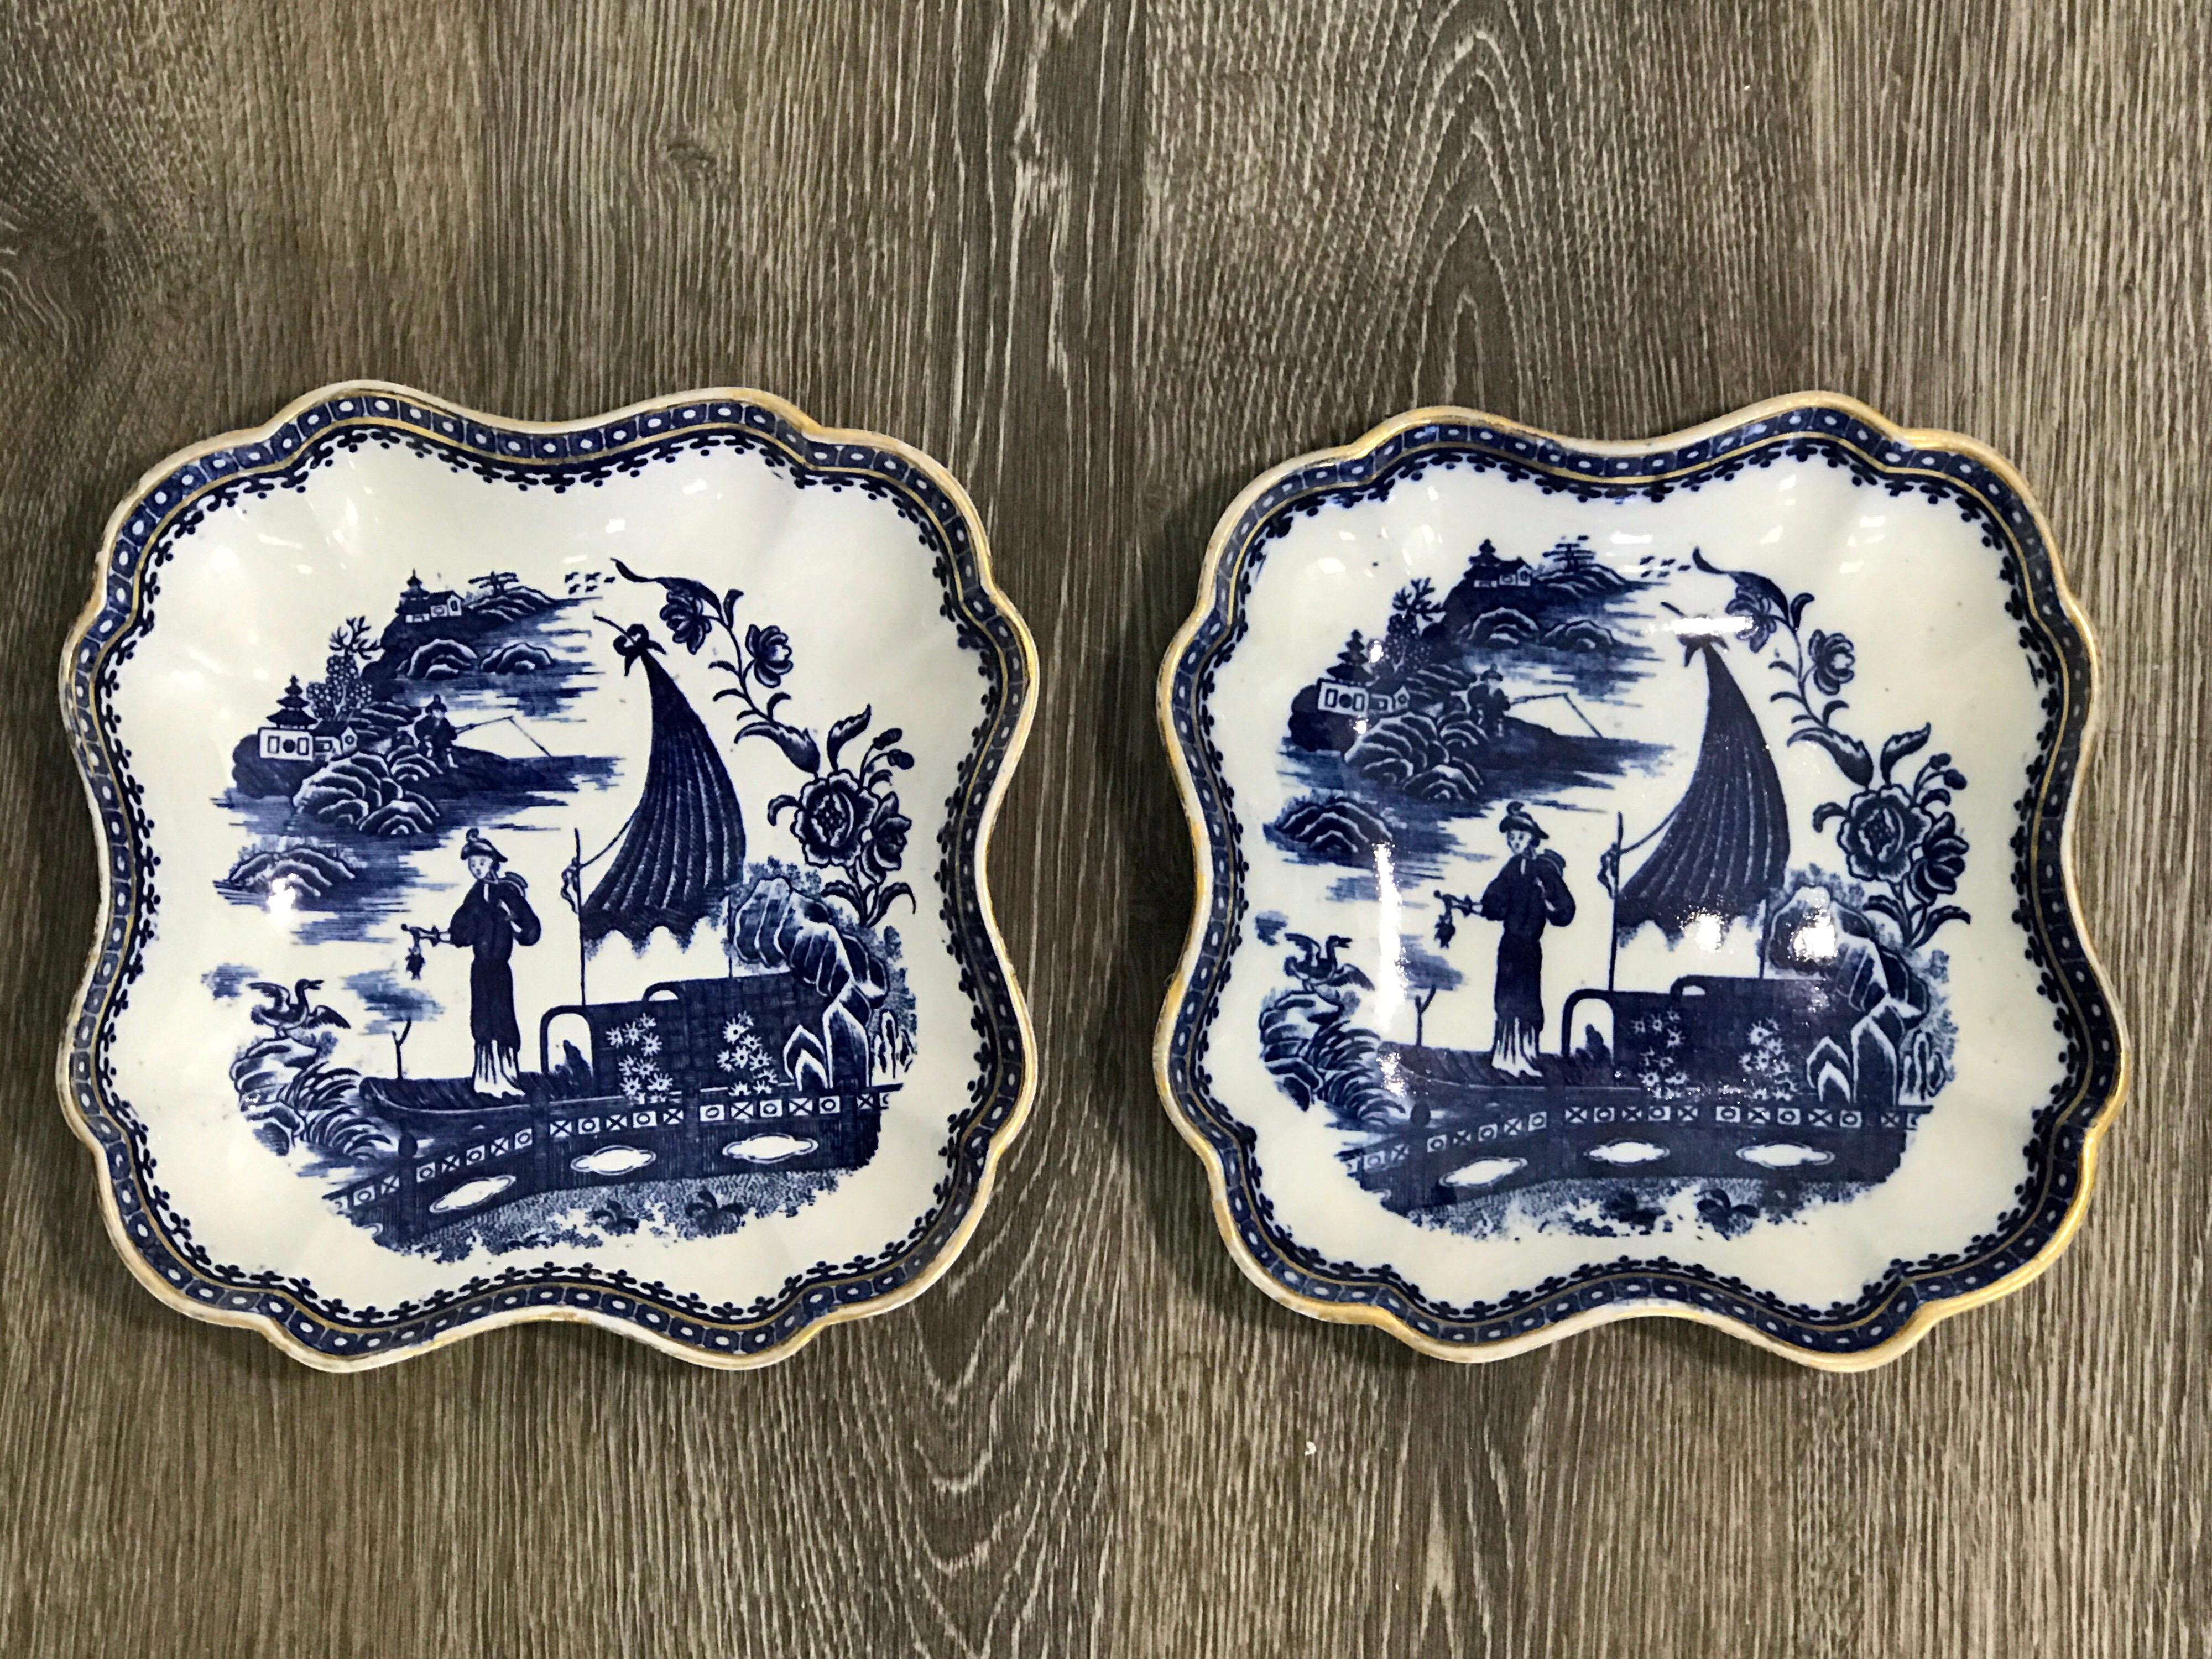 Pair of antique English blue and white chinoiserie square bowls by Caughley, each one with scalloped edges with gilt borders. Unmarked, one has a slight chip on the back rim, presents well.
 